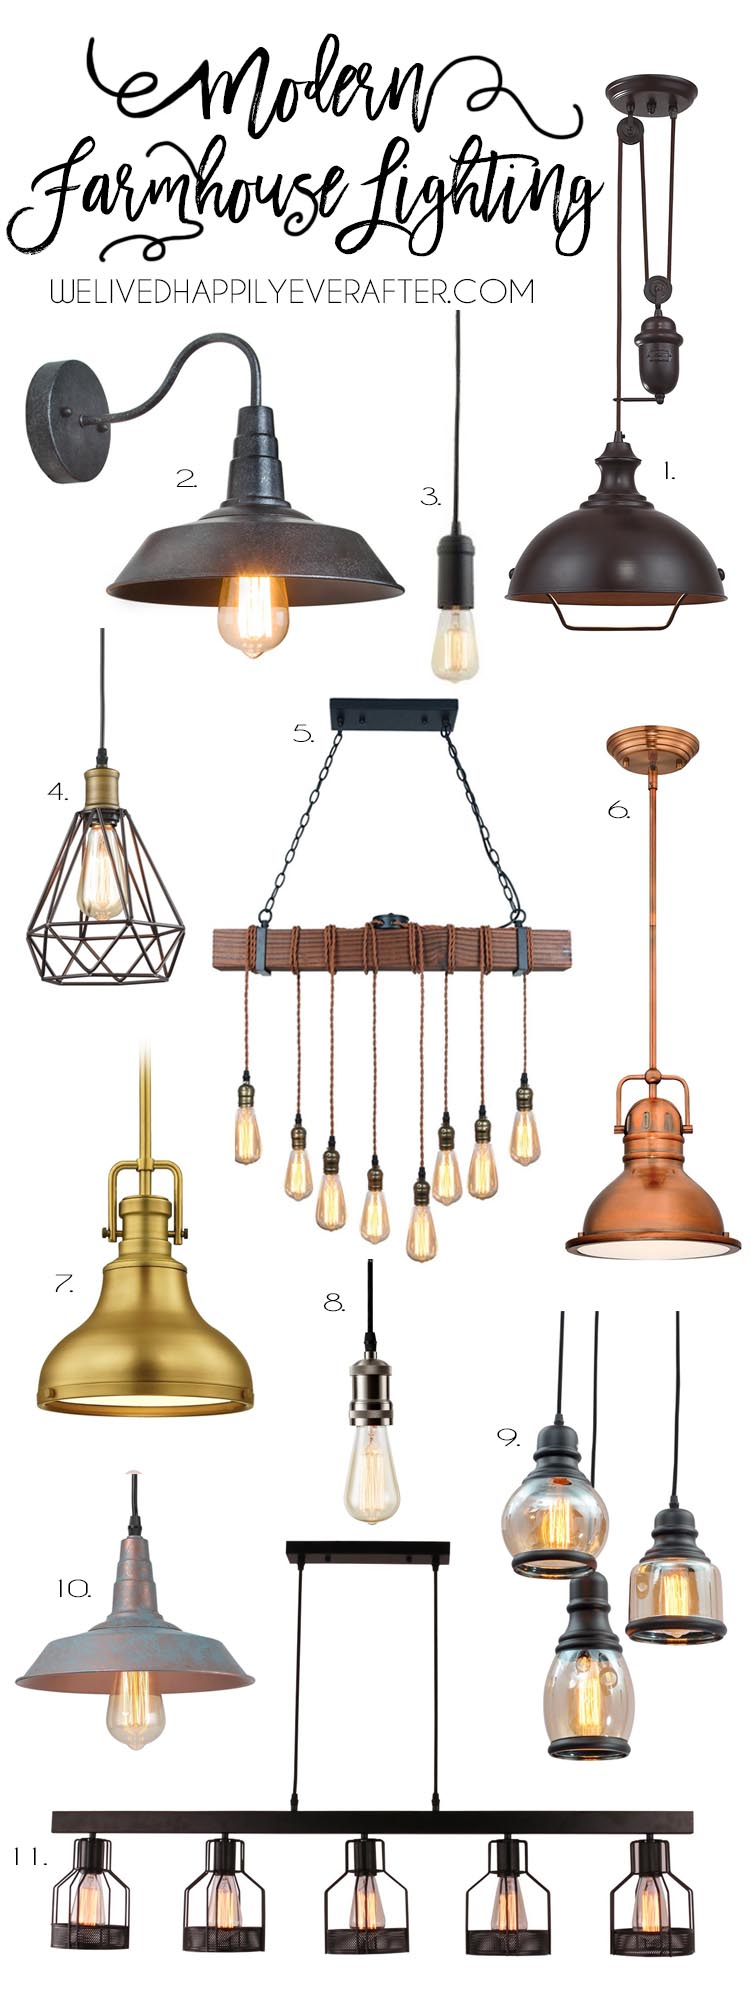 Rustic Industrial Modern Farmhouse Metal Lighting For Your Home Decor ...